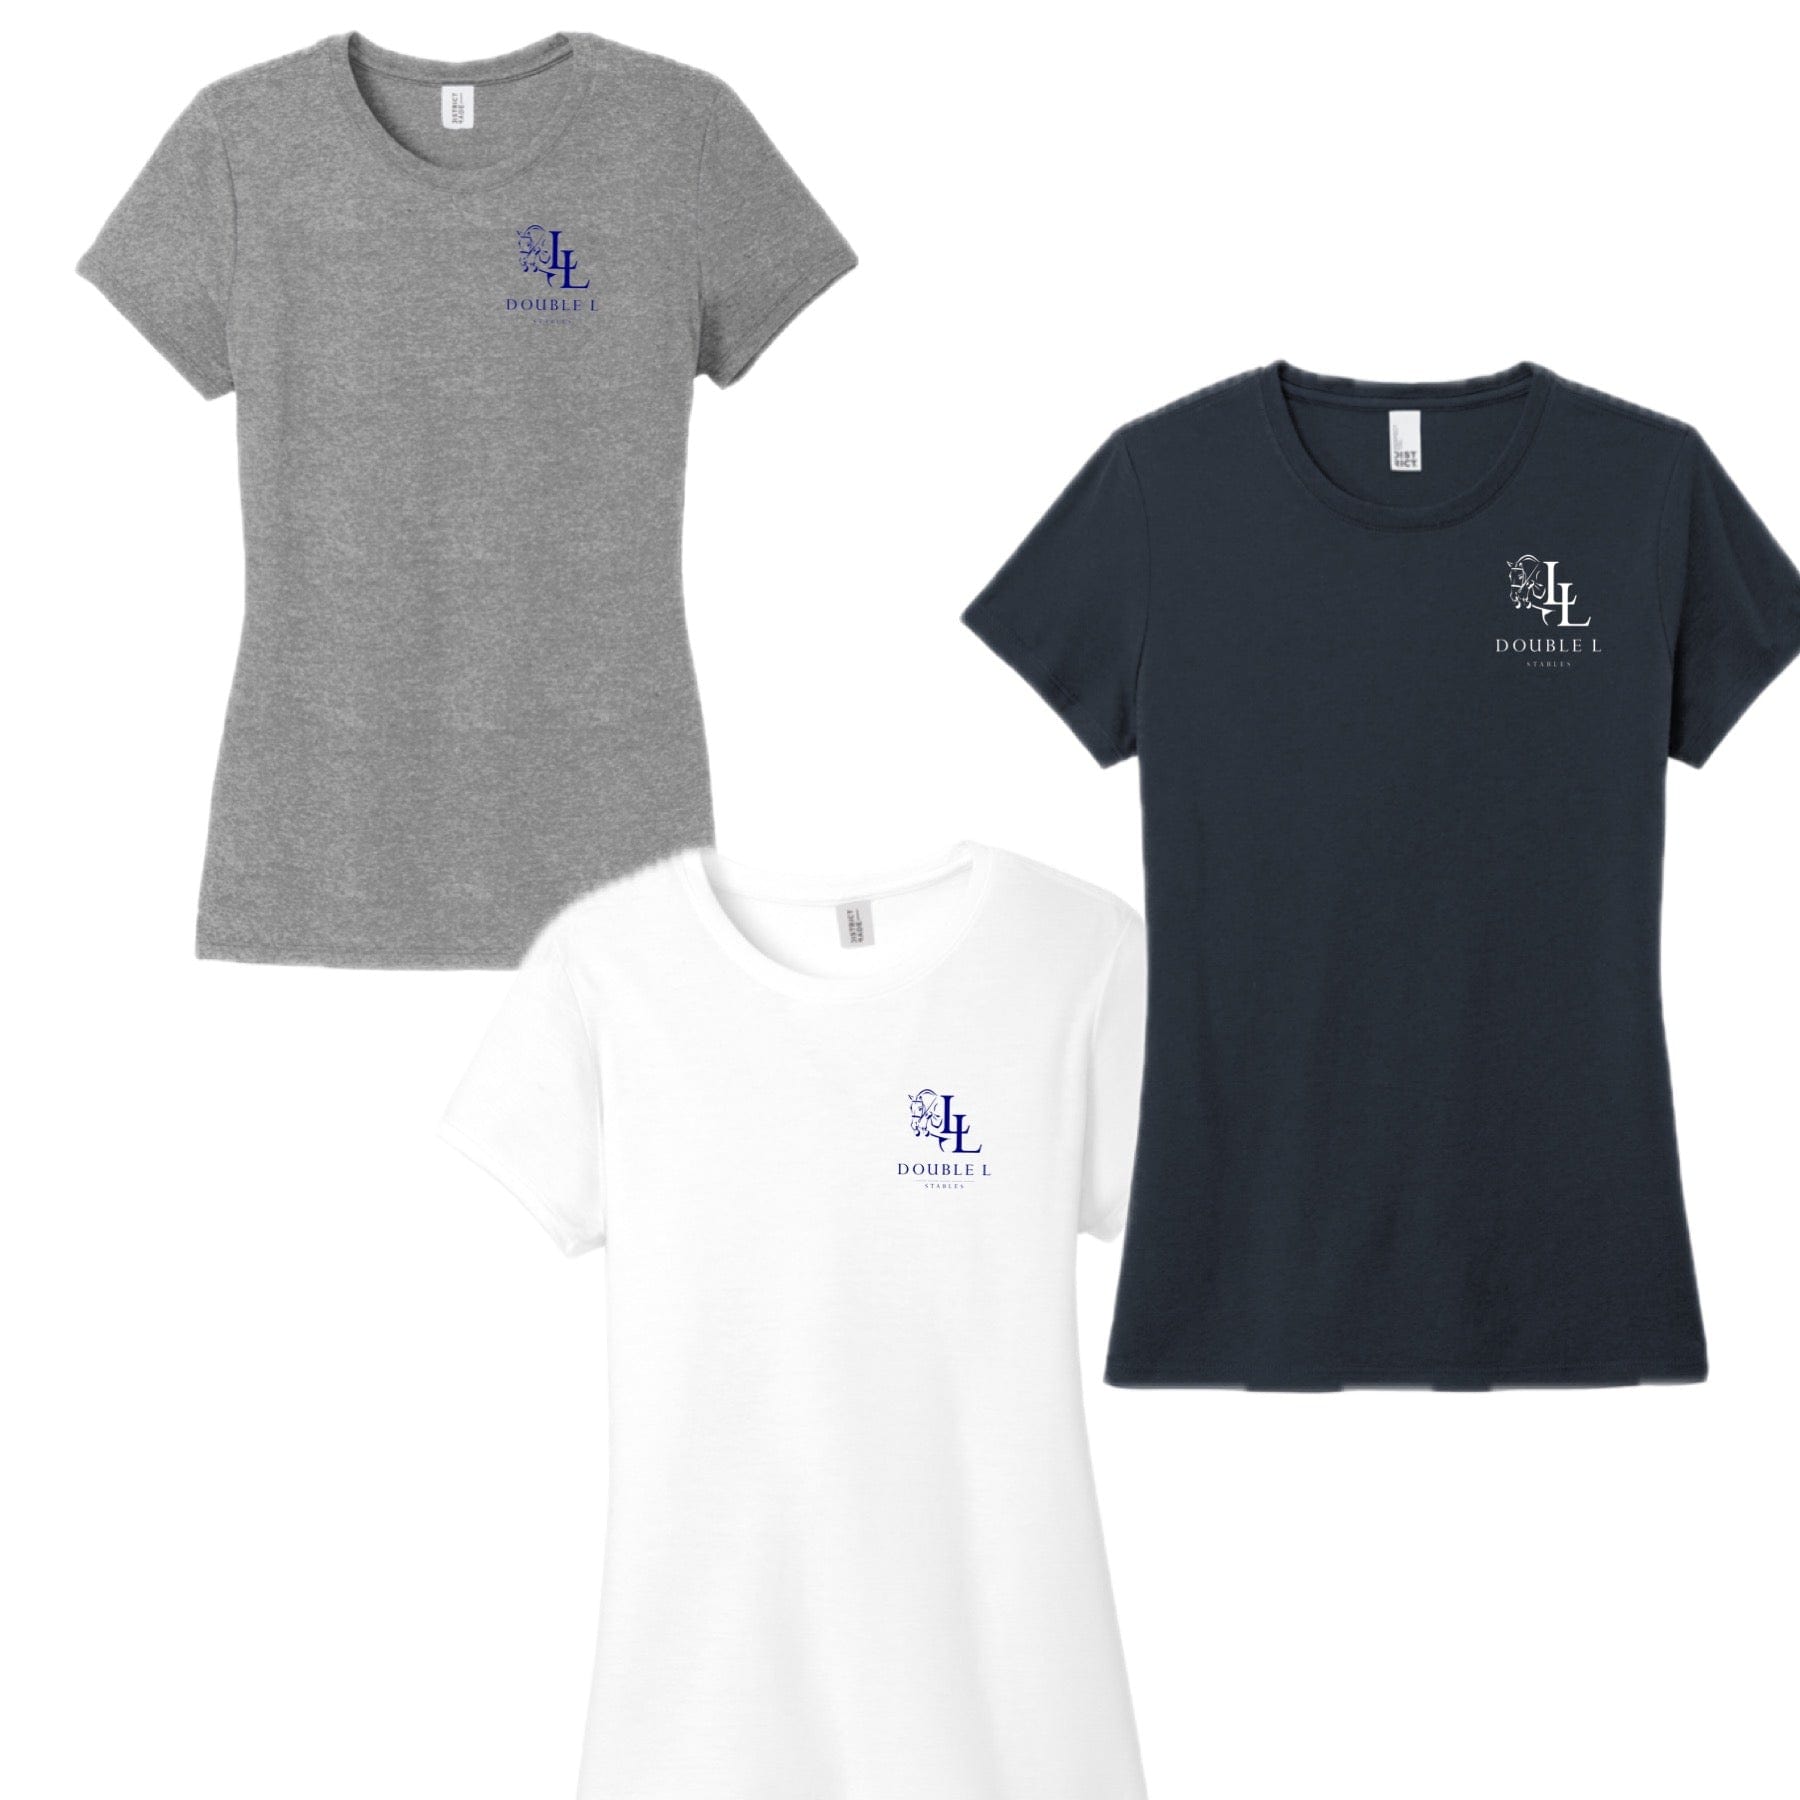 Equestrian Team Apparel Double L Stables Tee Shirts equestrian team apparel online tack store mobile tack store custom farm apparel custom show stable clothing equestrian lifestyle horse show clothing riding clothes horses equestrian tack store